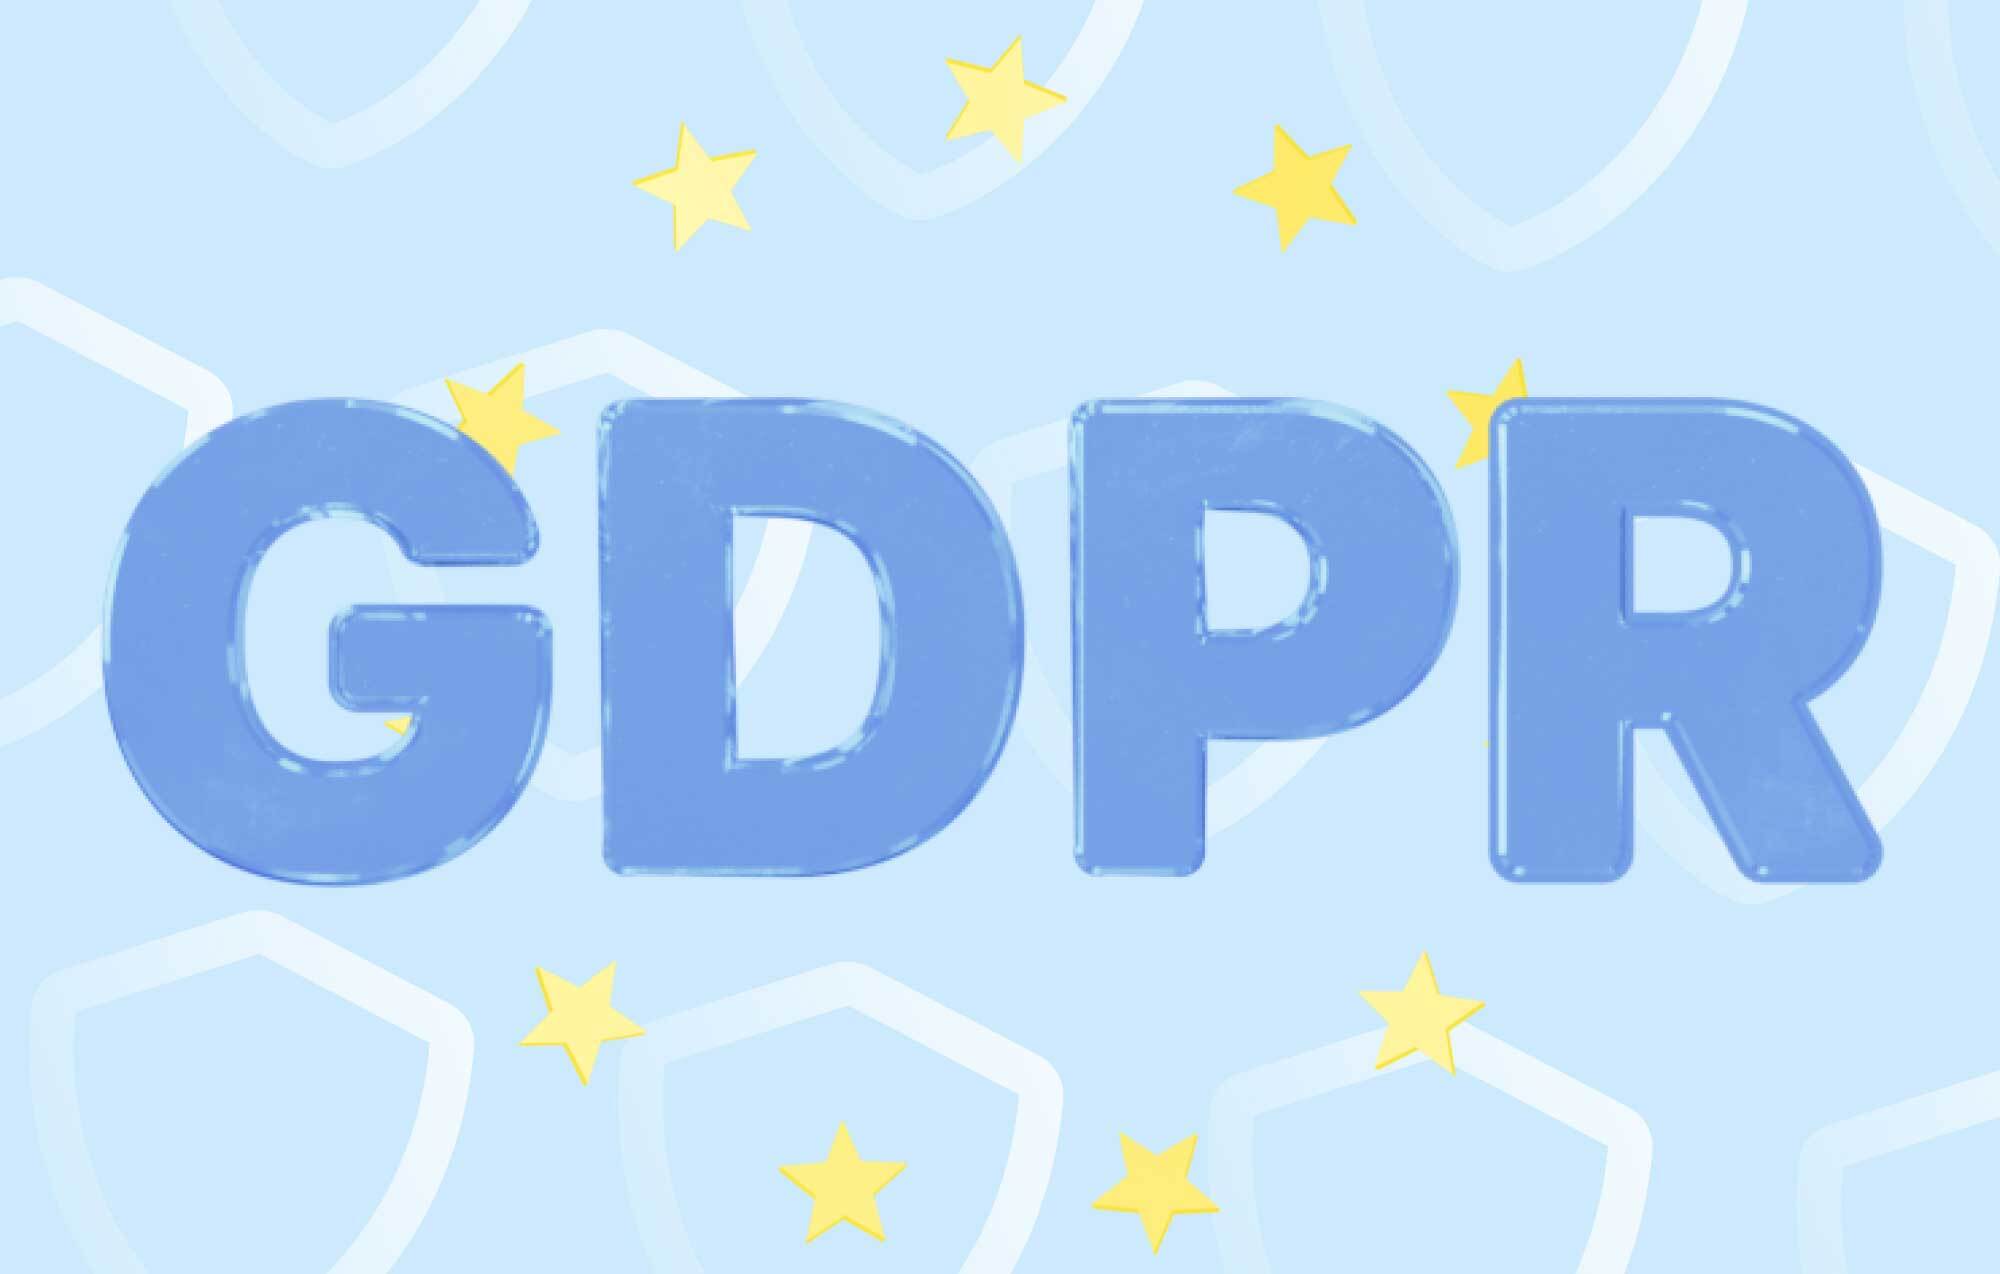 WhatsApp and GDPR, is it compliant? What do you have to do as a business to protect people's data. Read the charles blog for more